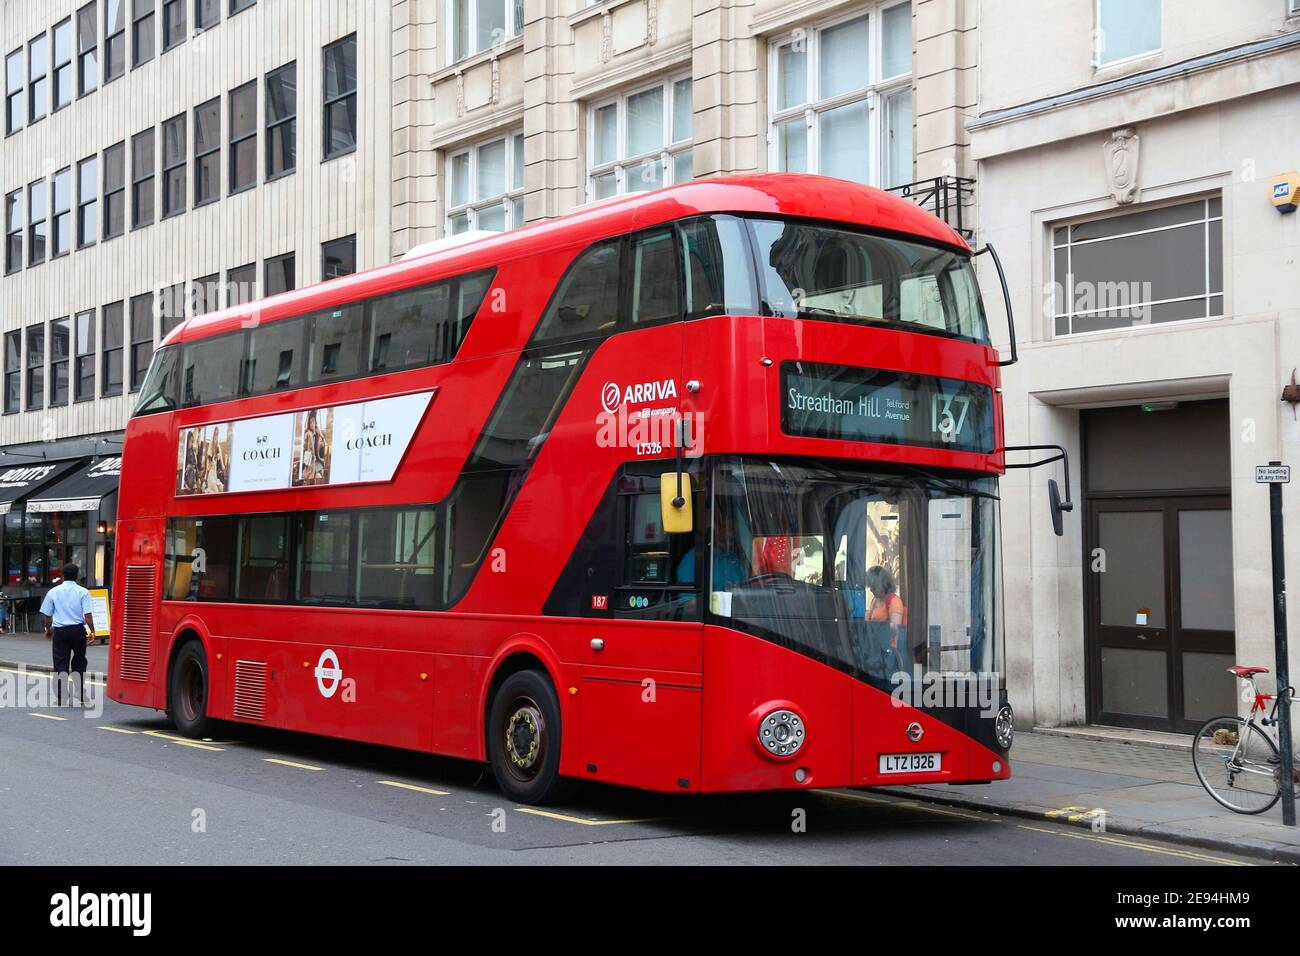 LONDON, UK - JULY 6, 2016: People ride New Routemaster bus in City of London. The hybrid diesel-electric bus is a new, modern version of iconic double Stock Photo